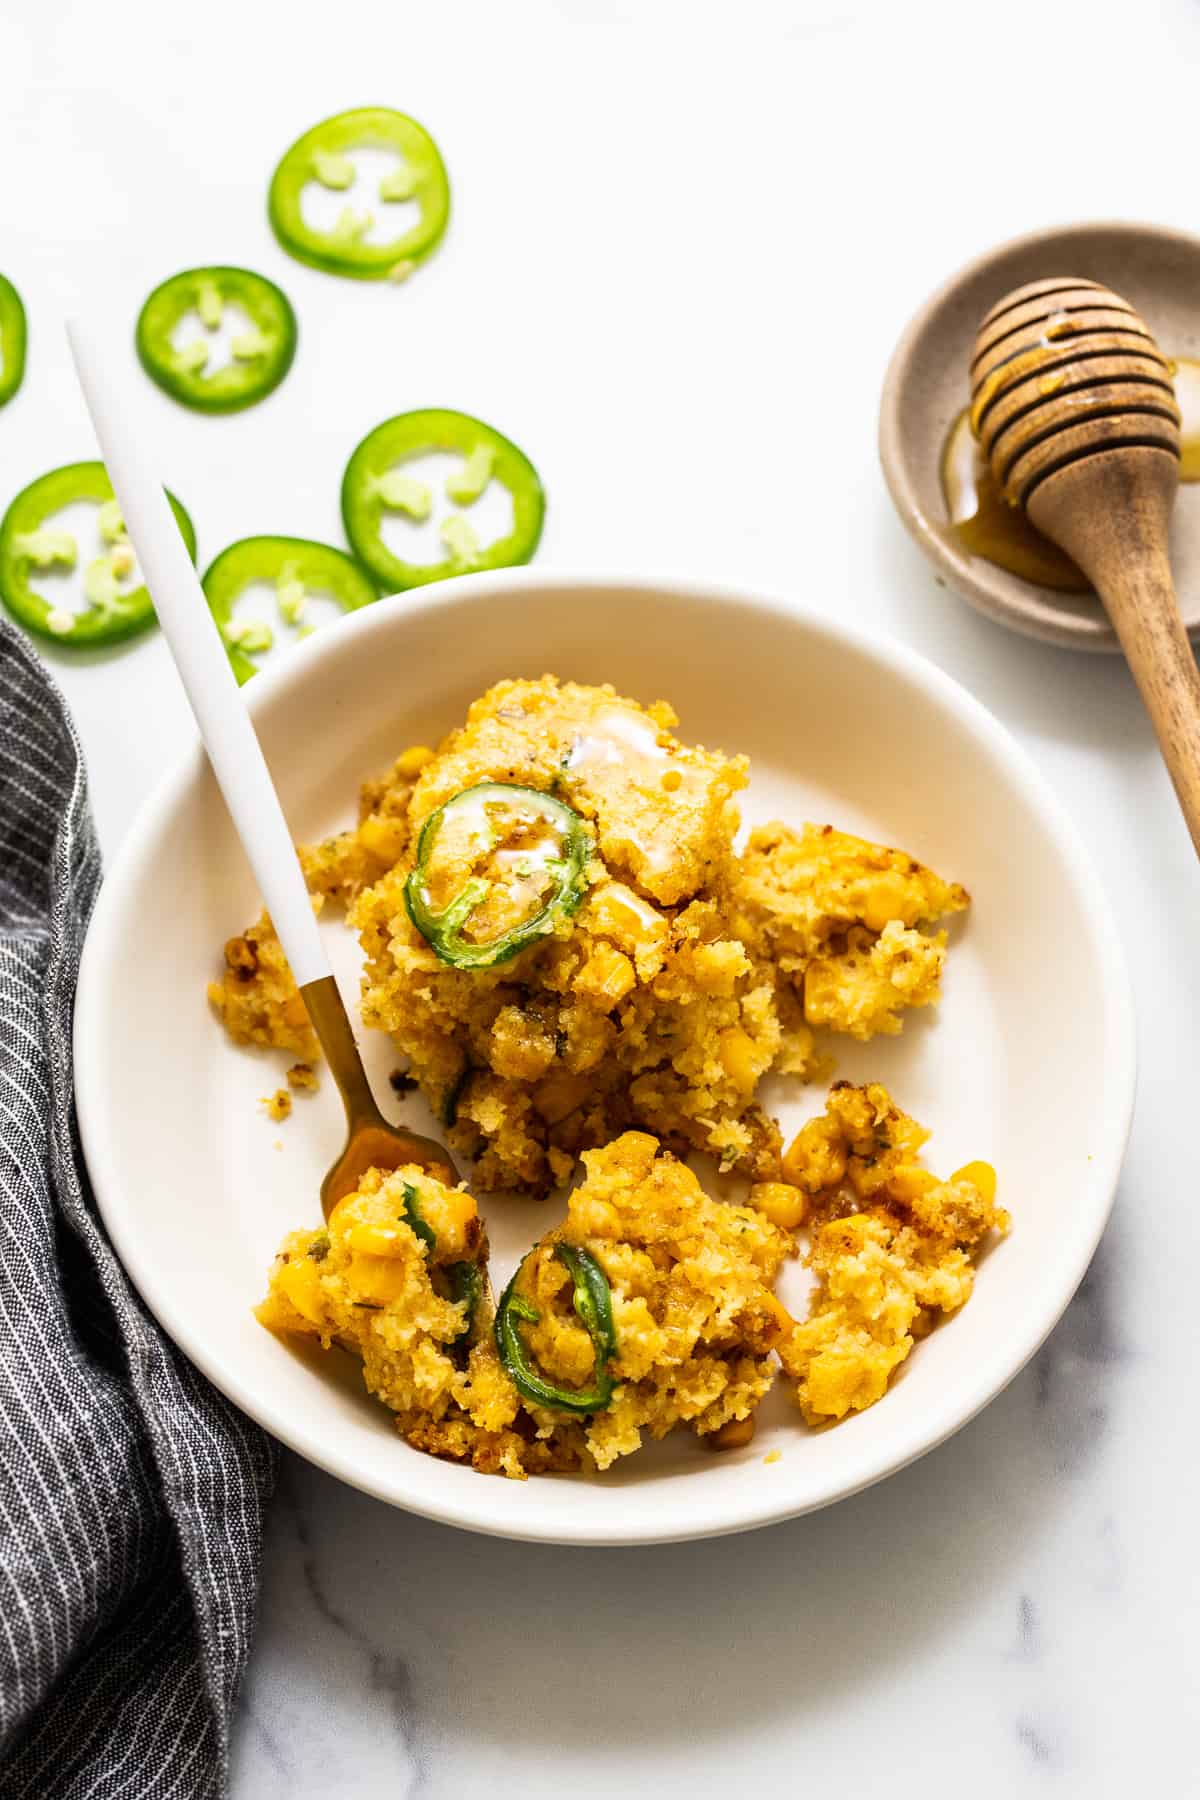 Jalapeno corn pudding in a bowl with a fork.